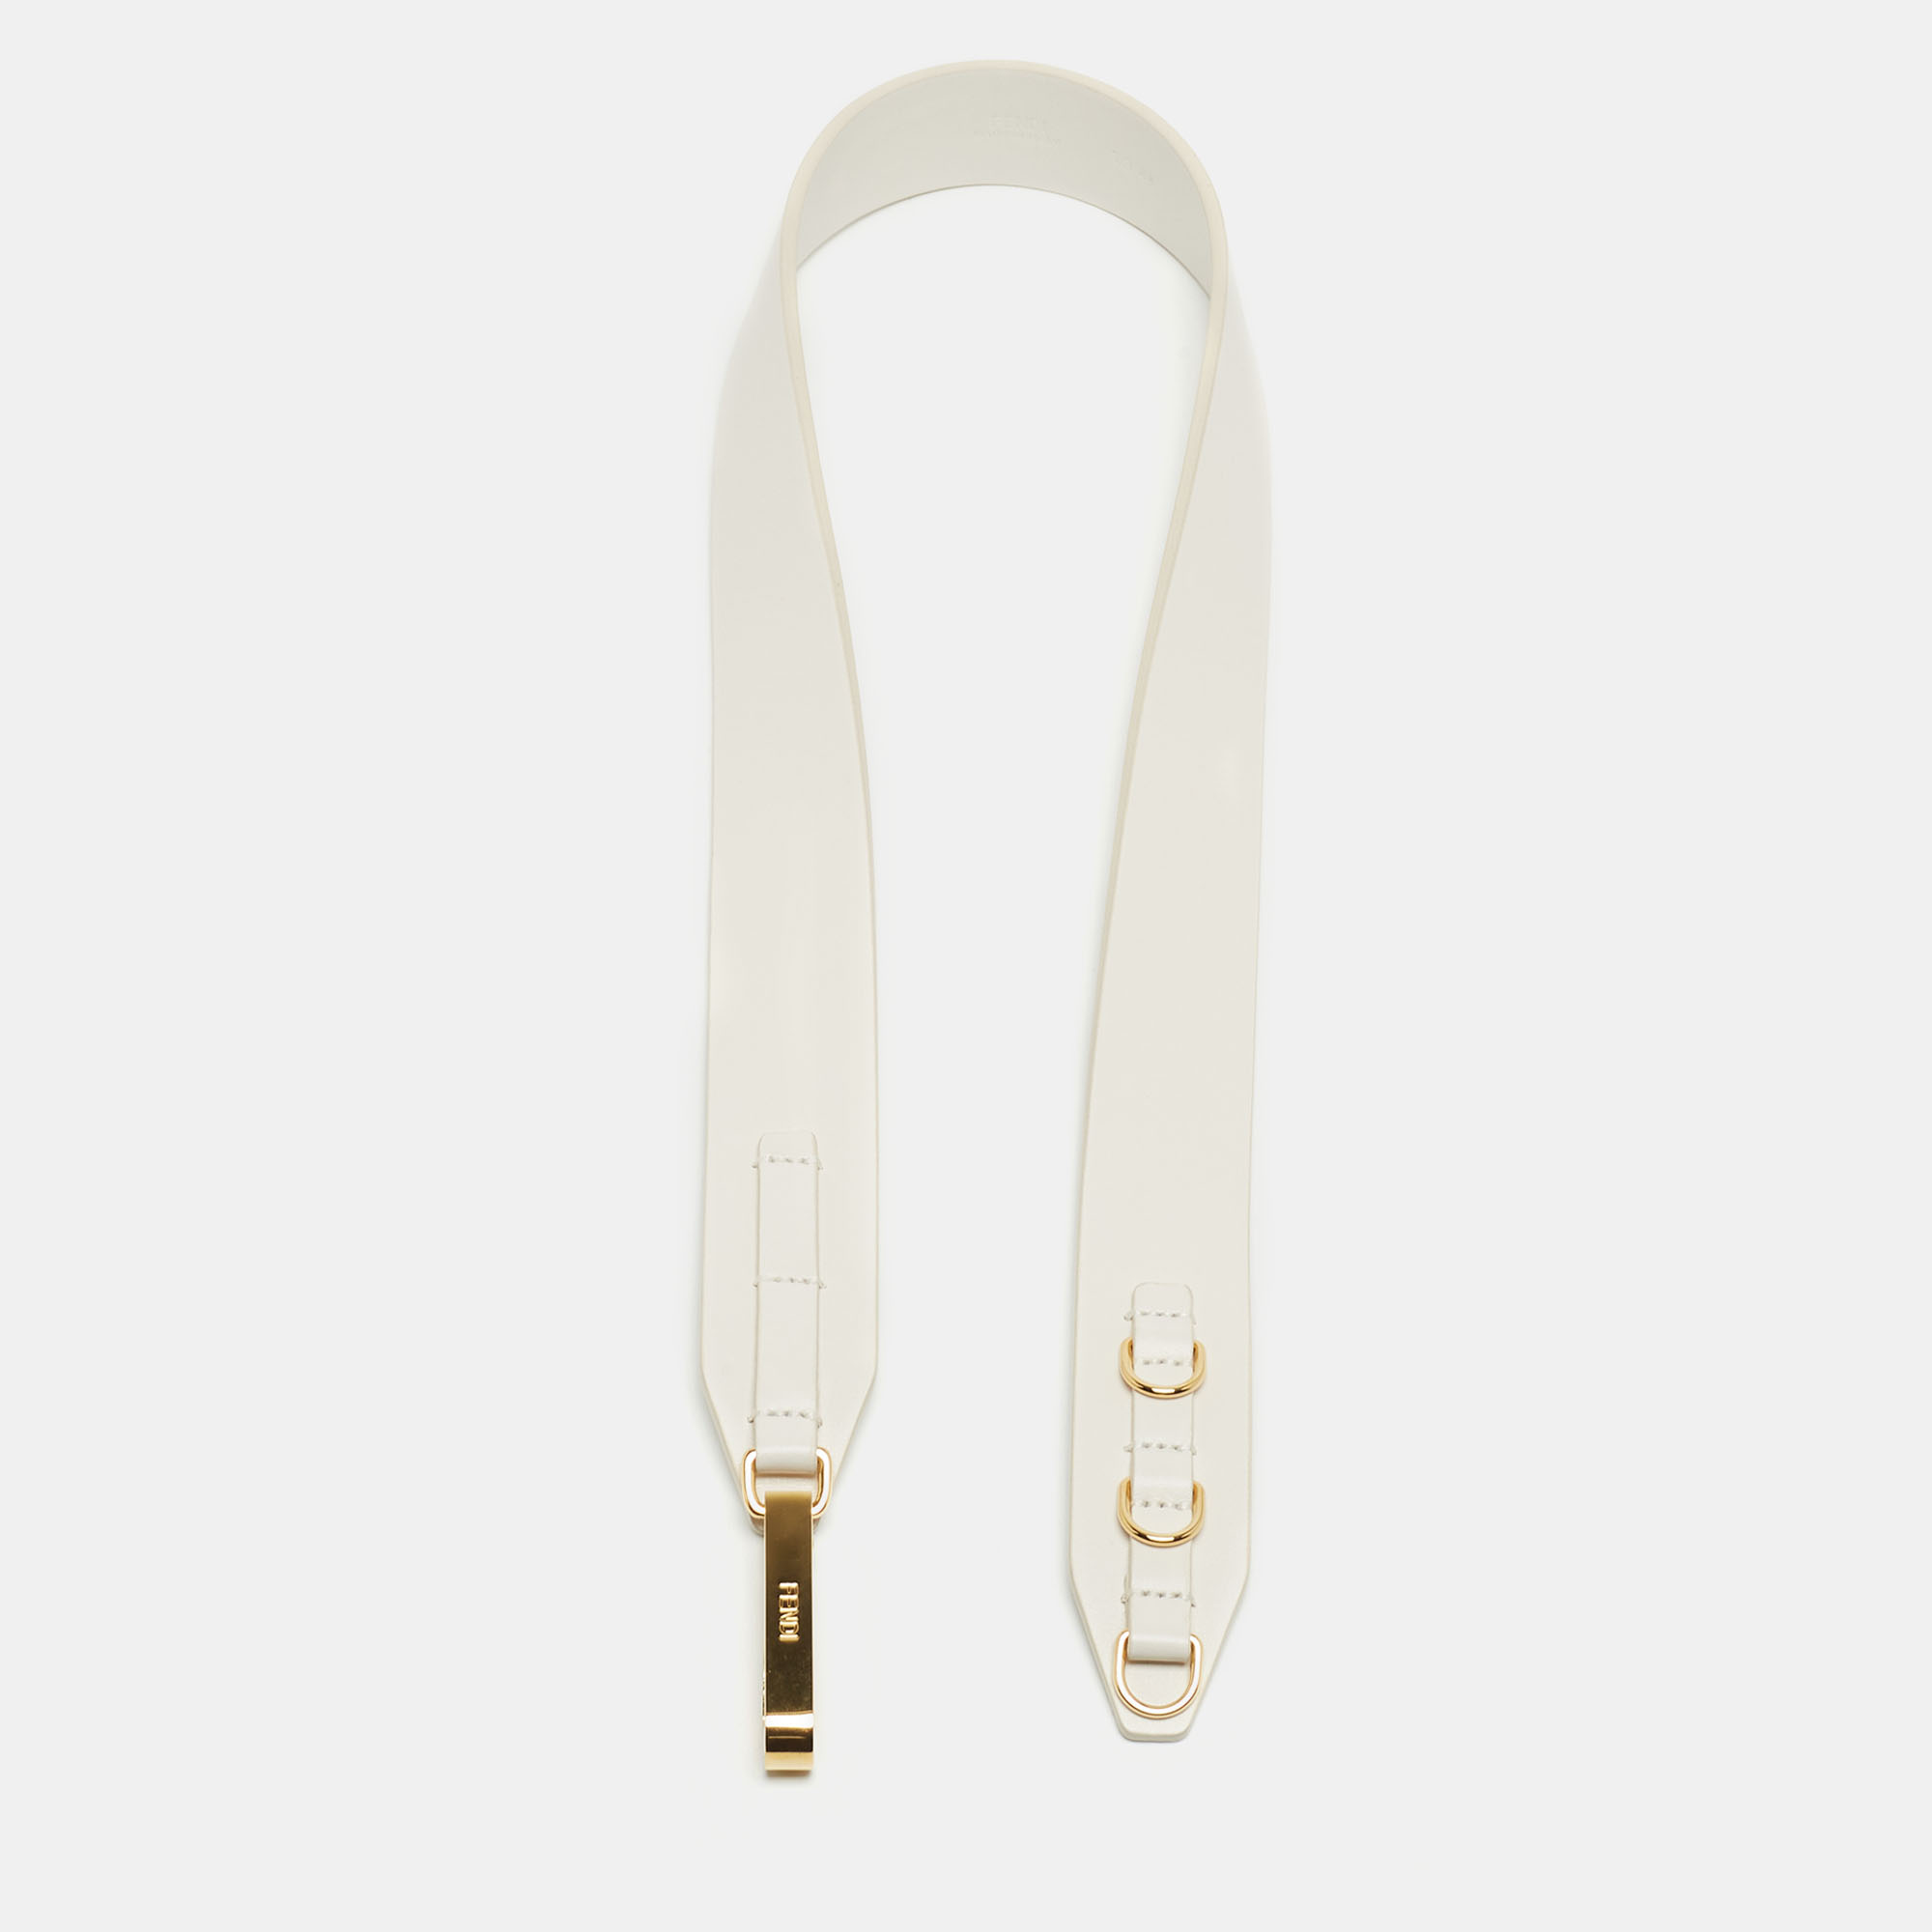 Fendi brings you this super chic shoulder strap that you can flaunt with your collection of handbags. The strap is made from leather and decorated with gold tone clasps.